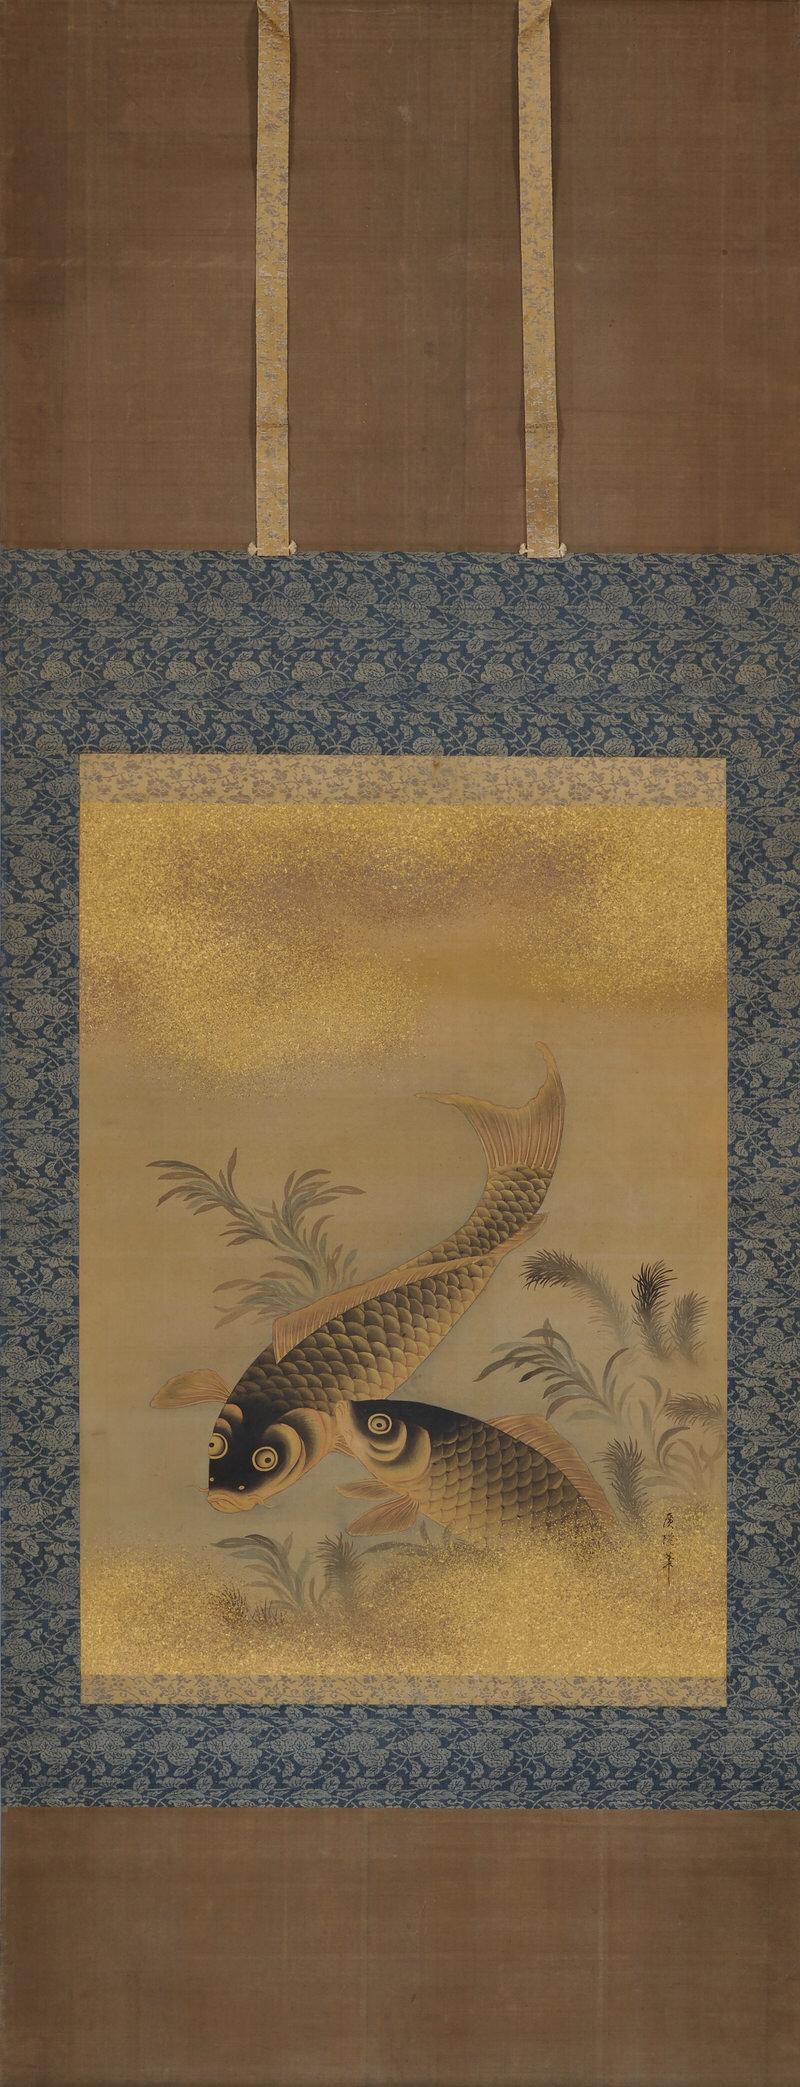 Iwase Hirotaka (1808-1877)

Koi and Water Plants

Hanging scroll, ink, color, gold wash and gold flecks on silk

Inscription: Hirotaka

Seal: Illegible

Dimensions:

Scroll:  144 cm x 54.5 cm (56.5